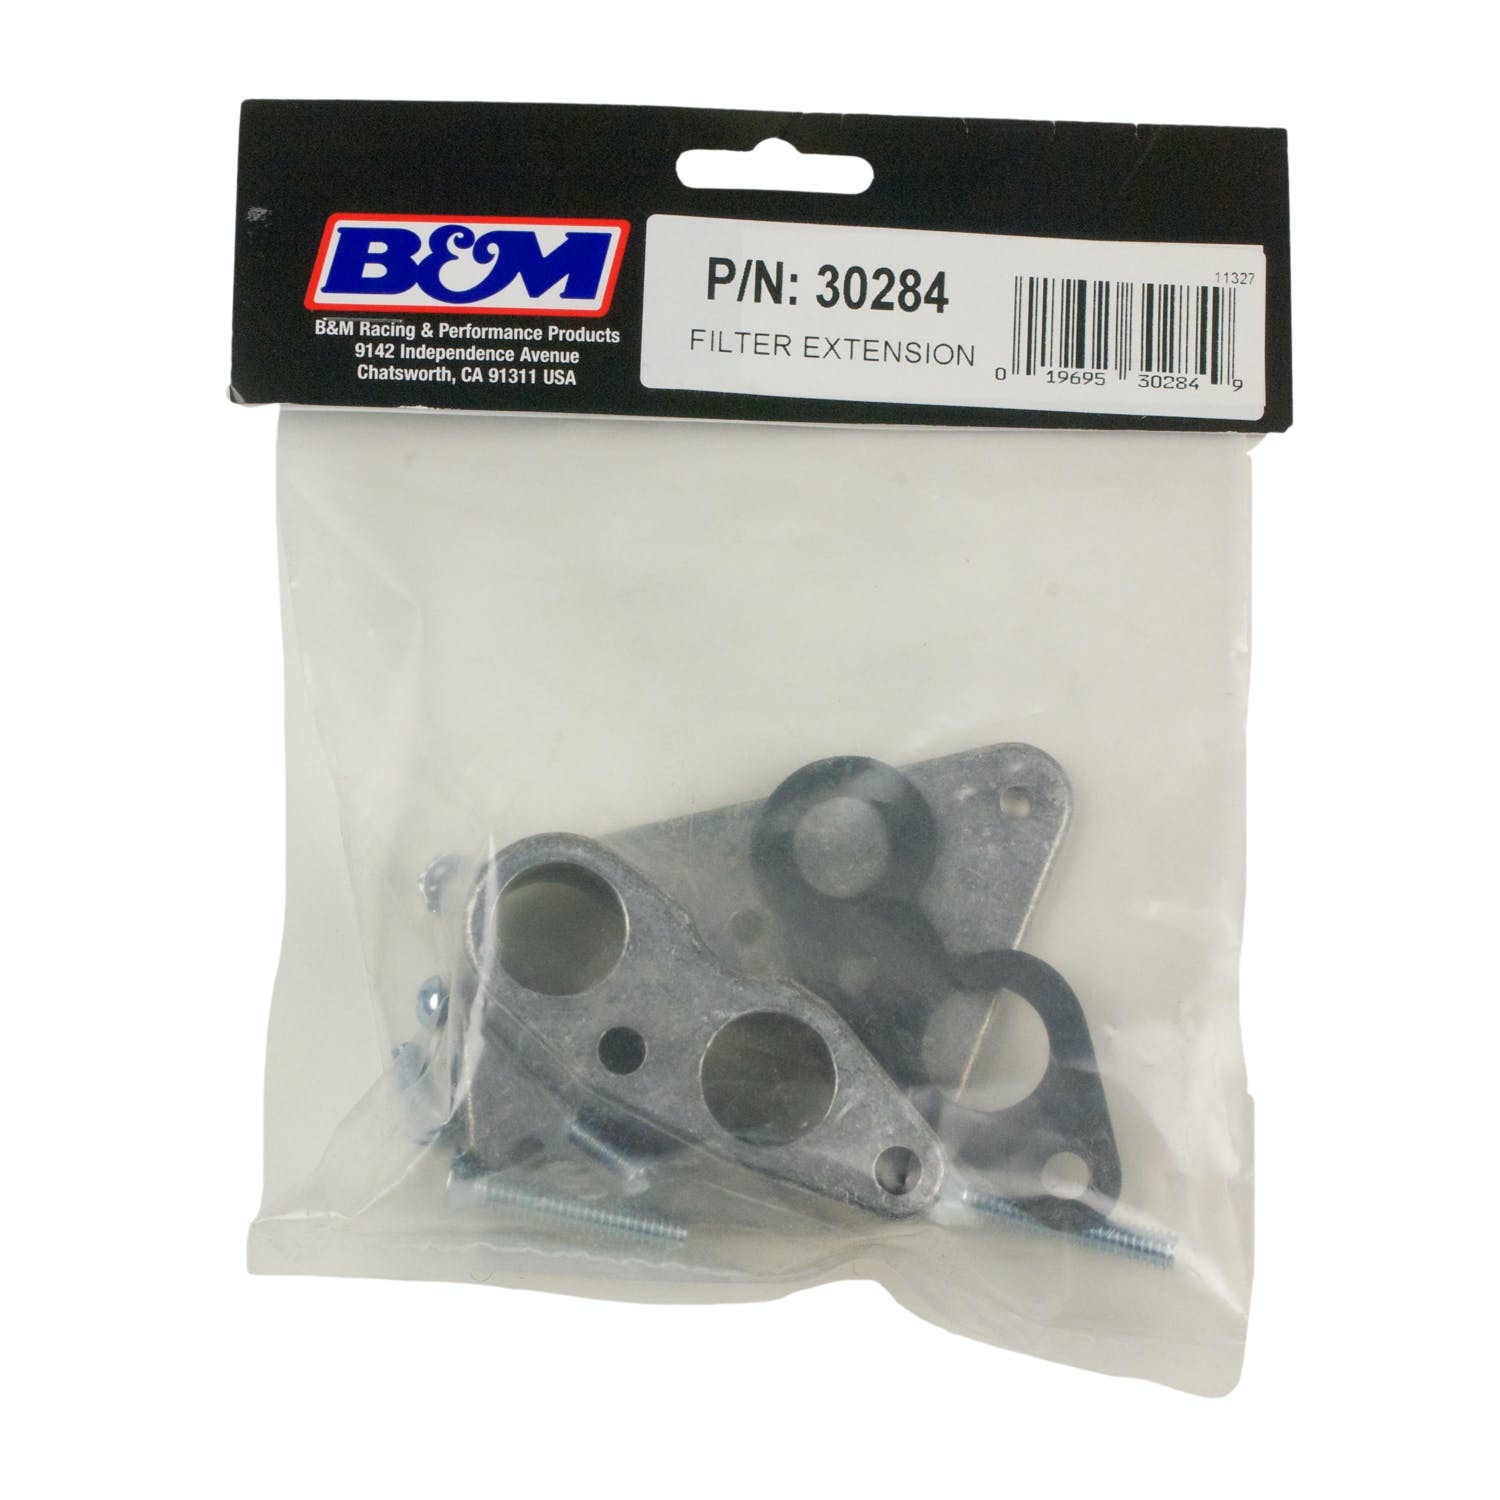 B&M 30284 FILTER EXTENSION 30280 and 30289